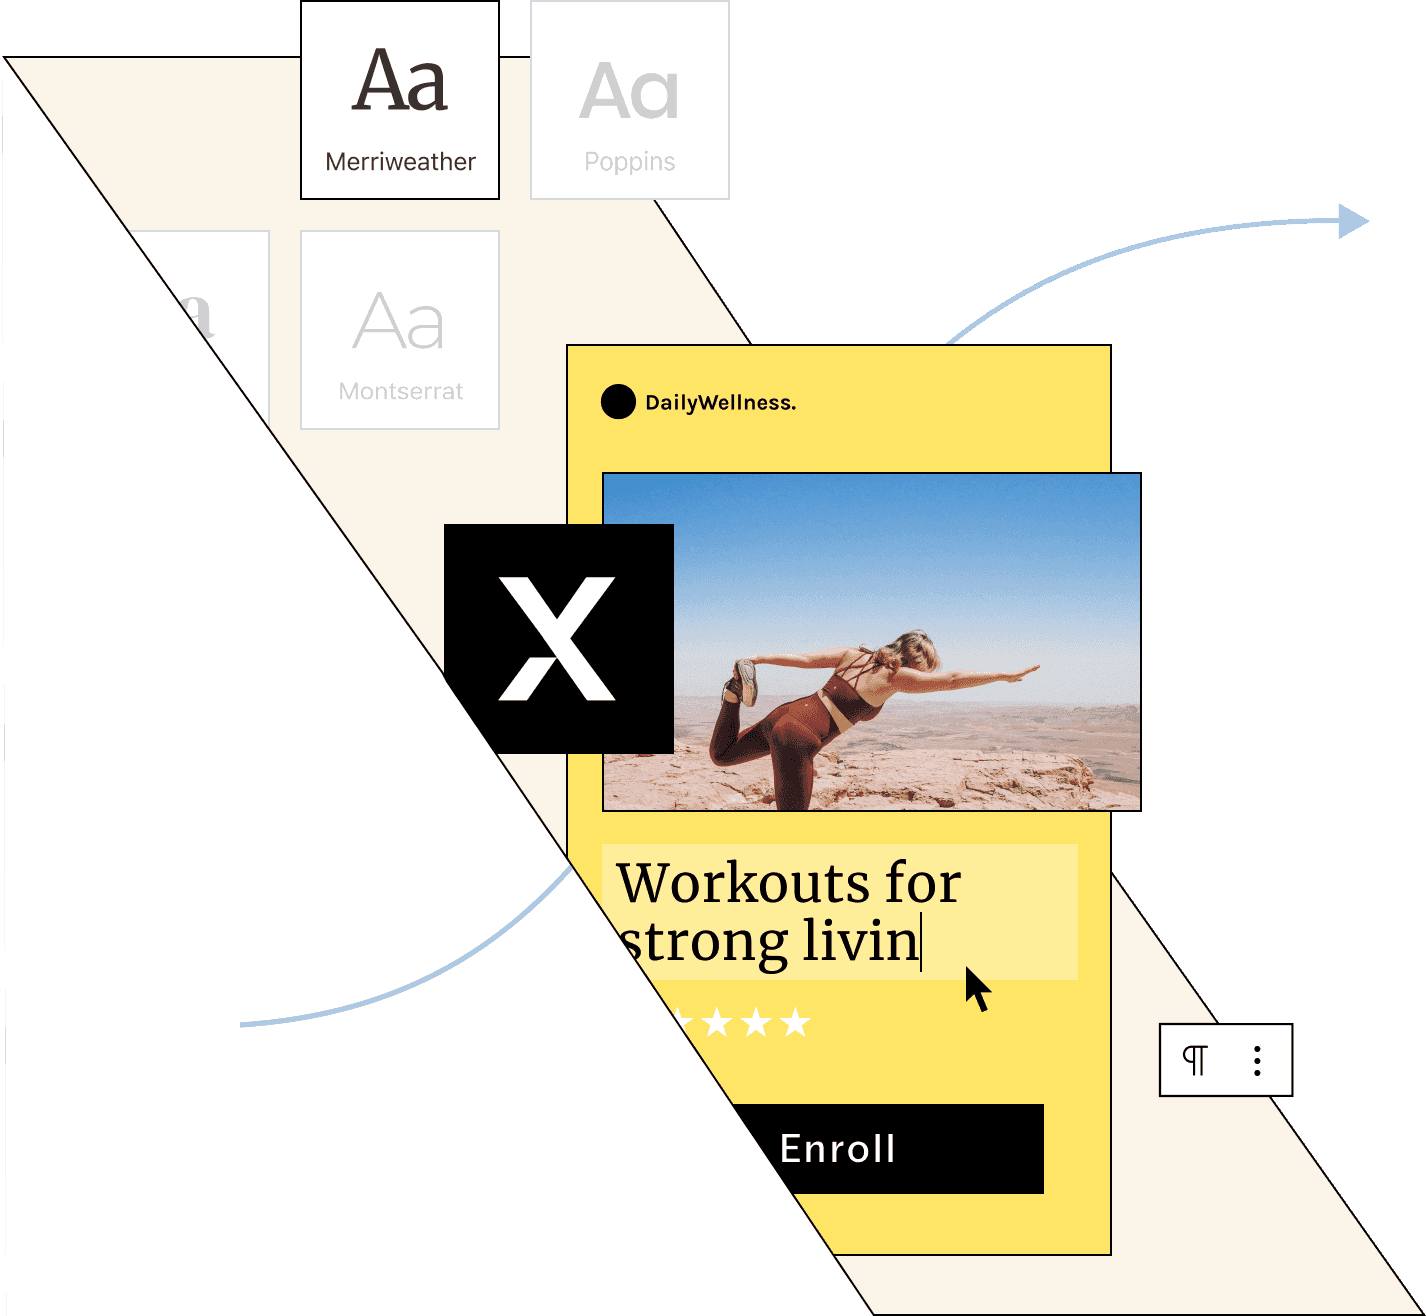 A site owner designs an online fitness class with their hosting products, typing Workouts for stronger livin above an enroll button, a woman stretches in the desert